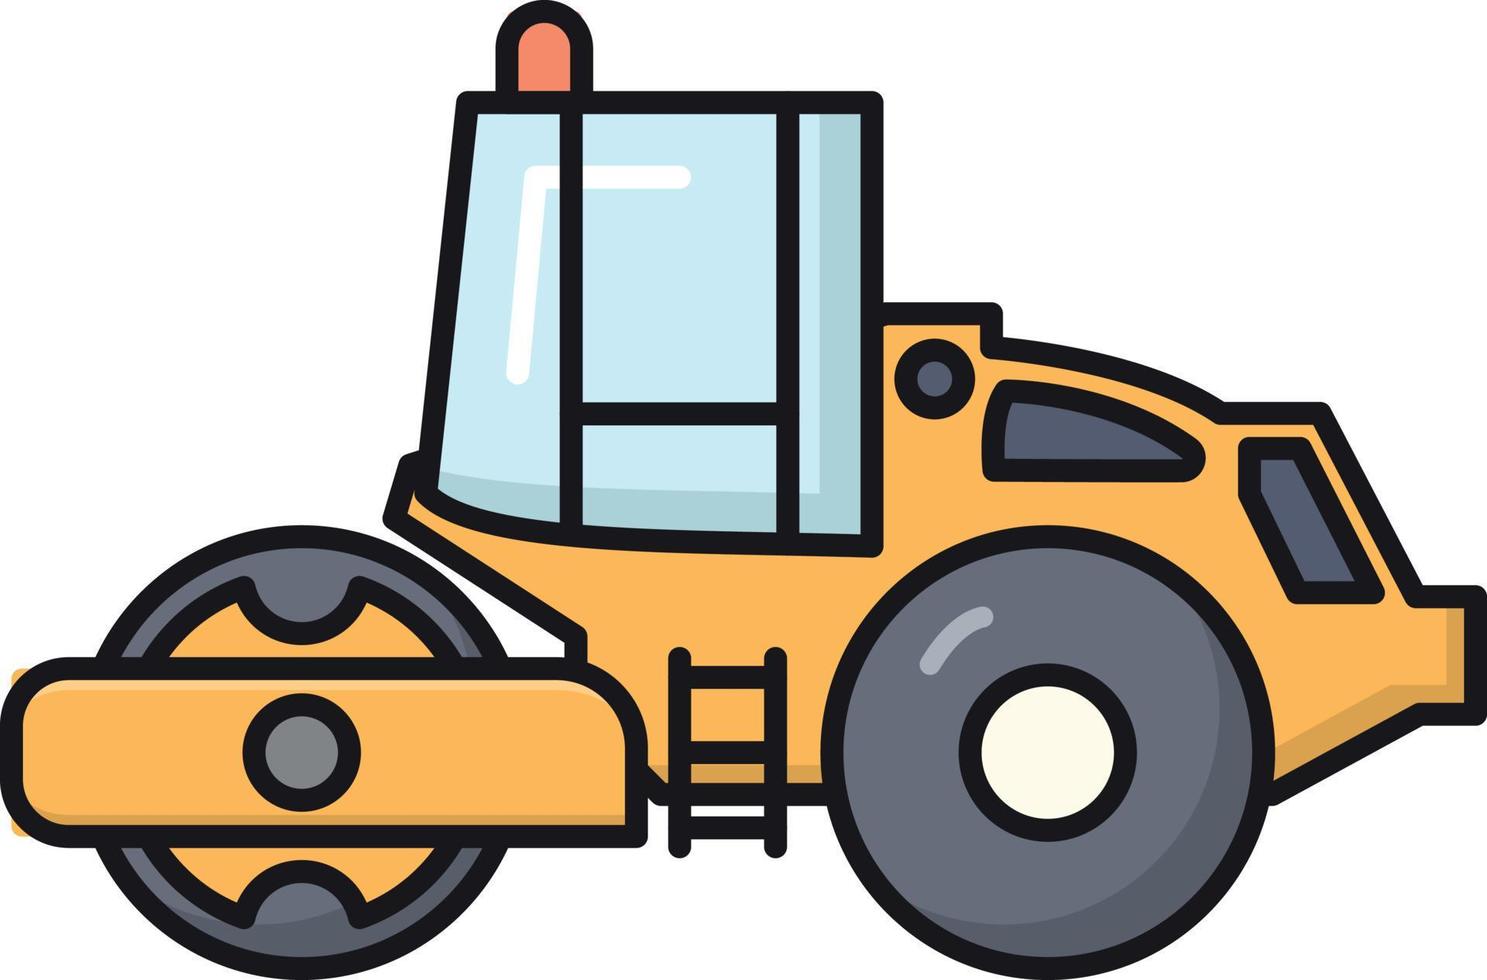 road roller vector illustration on a background.Premium quality symbols.vector icons for concept and graphic design.